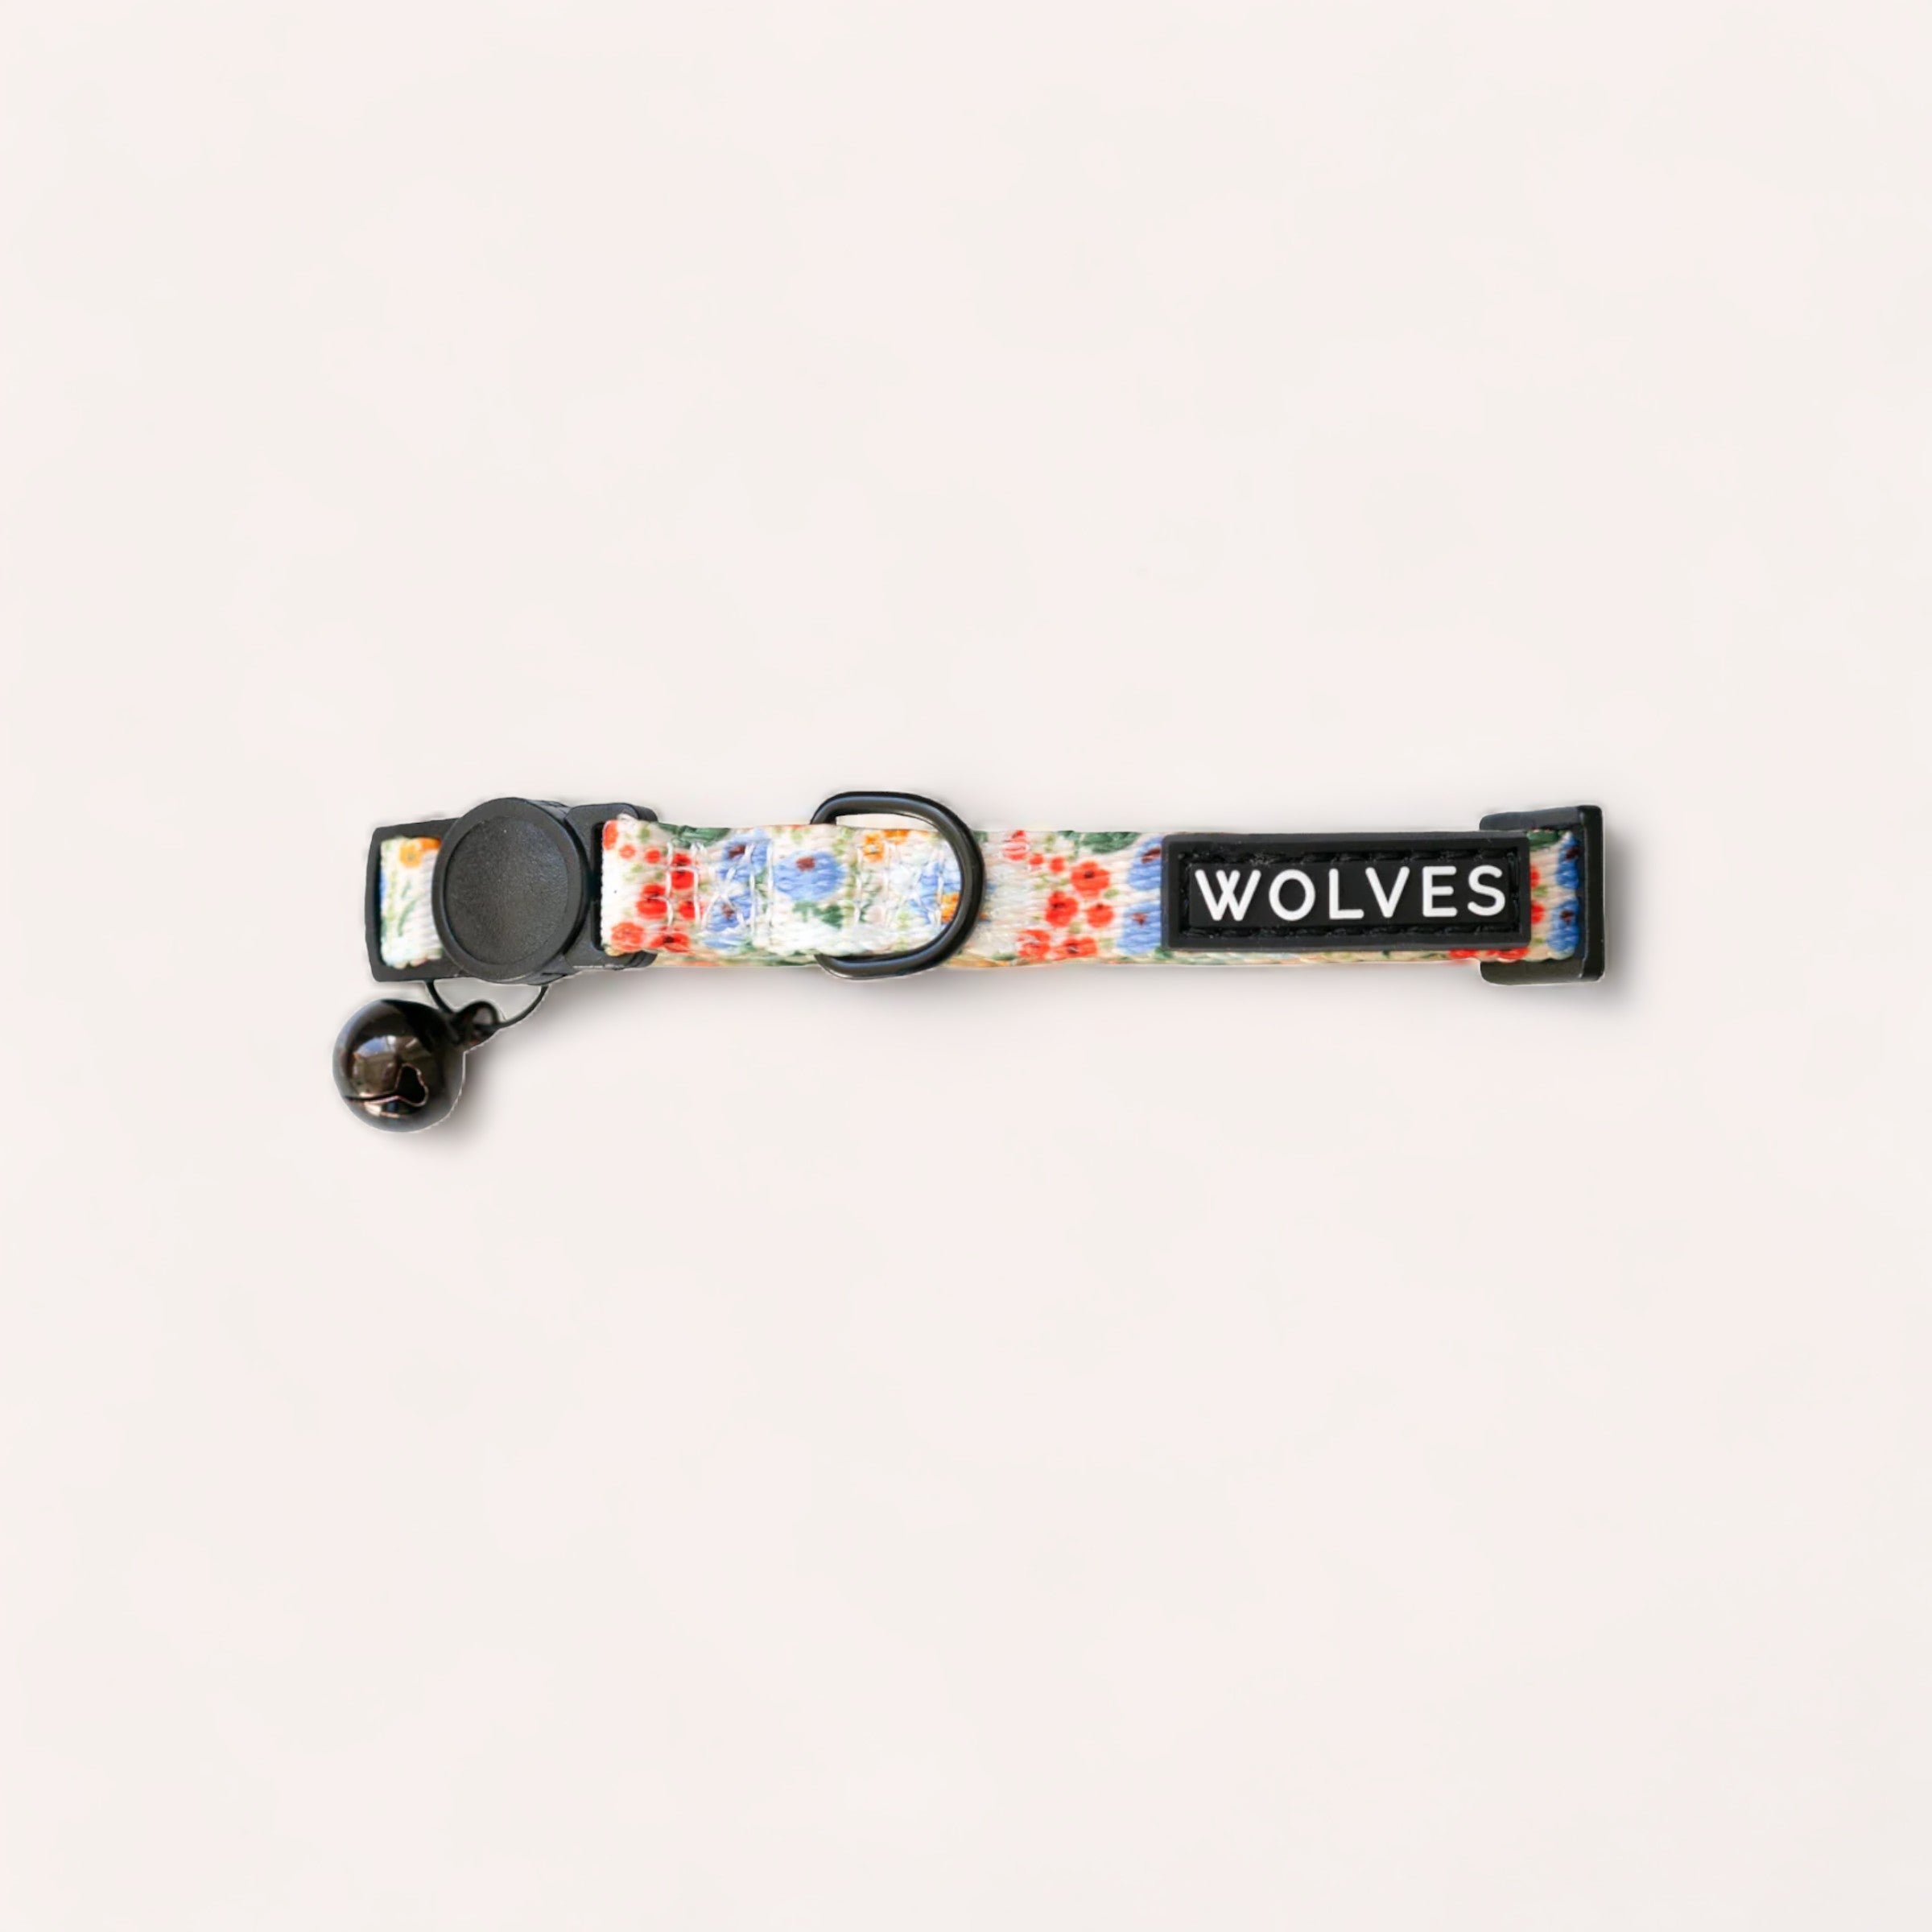 A Posy Cat Collar by Wolves of Wellington with a floral pattern and the word "wolves" printed on it, featuring a breakaway buckle and key ring.